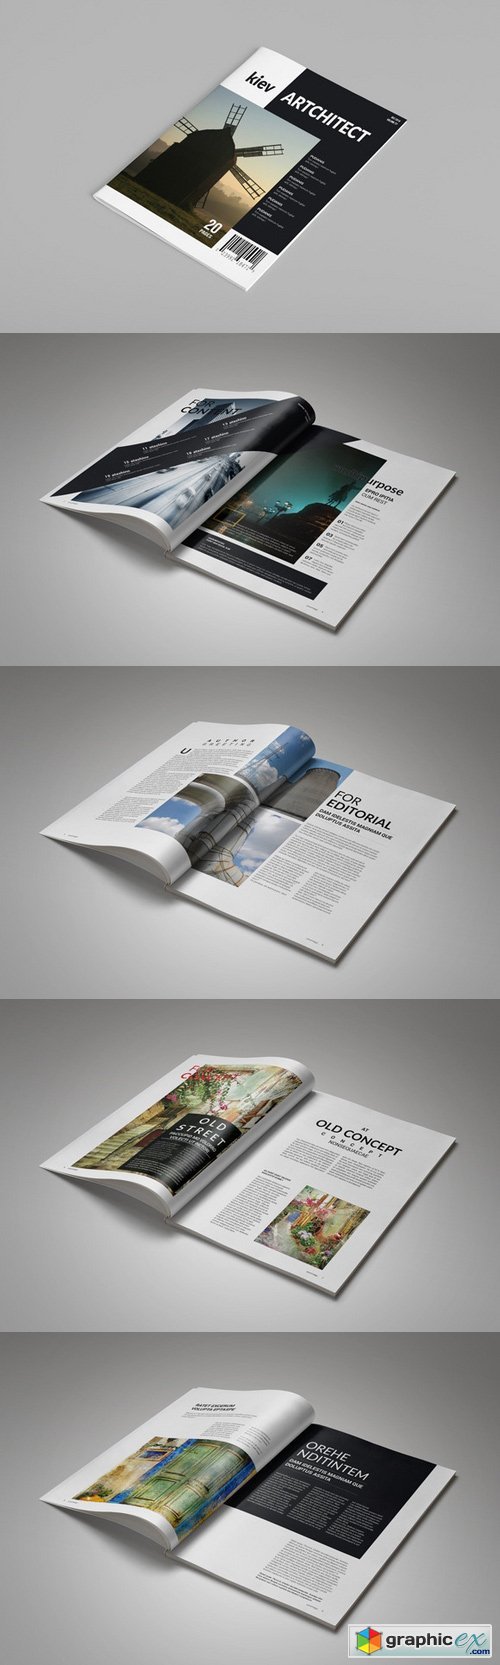 InDesign Magazine Template 20 Pages